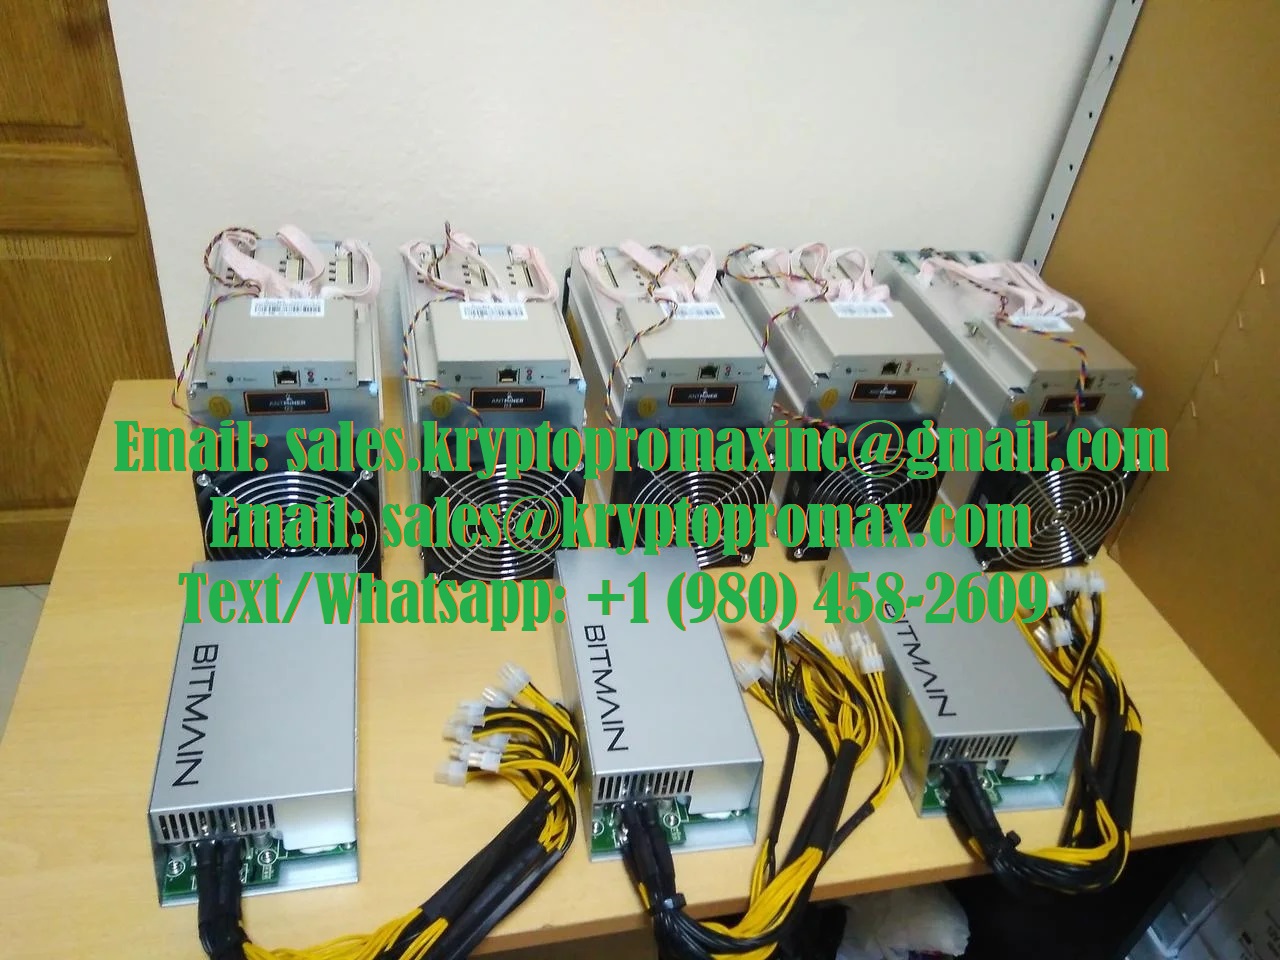 MicroBT Whatsminer M30S+ | Asic Miners for Sale